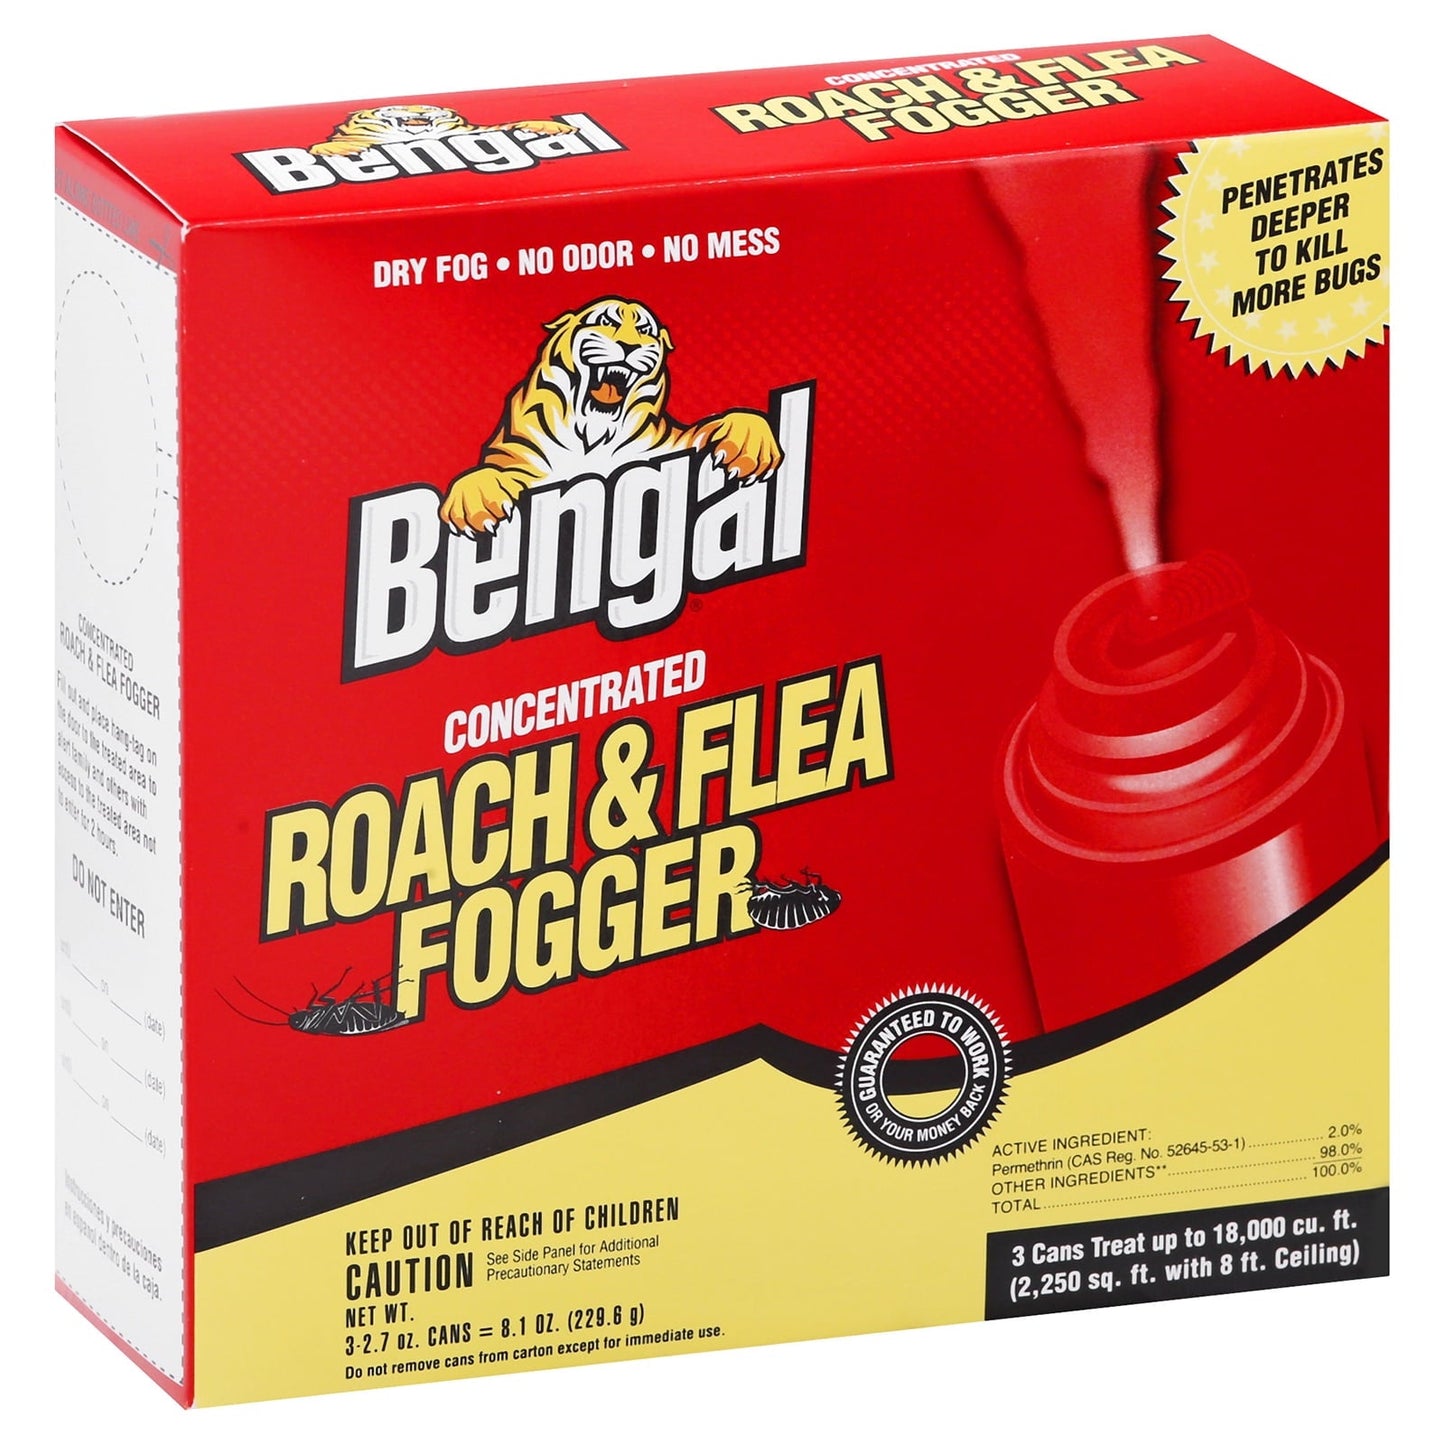 Bengal Concentrated Roach and Flea Killer Fogger, Odorless Mess-Free Dry Fog, 3 Count, 2.7 Oz Aerosol Cans